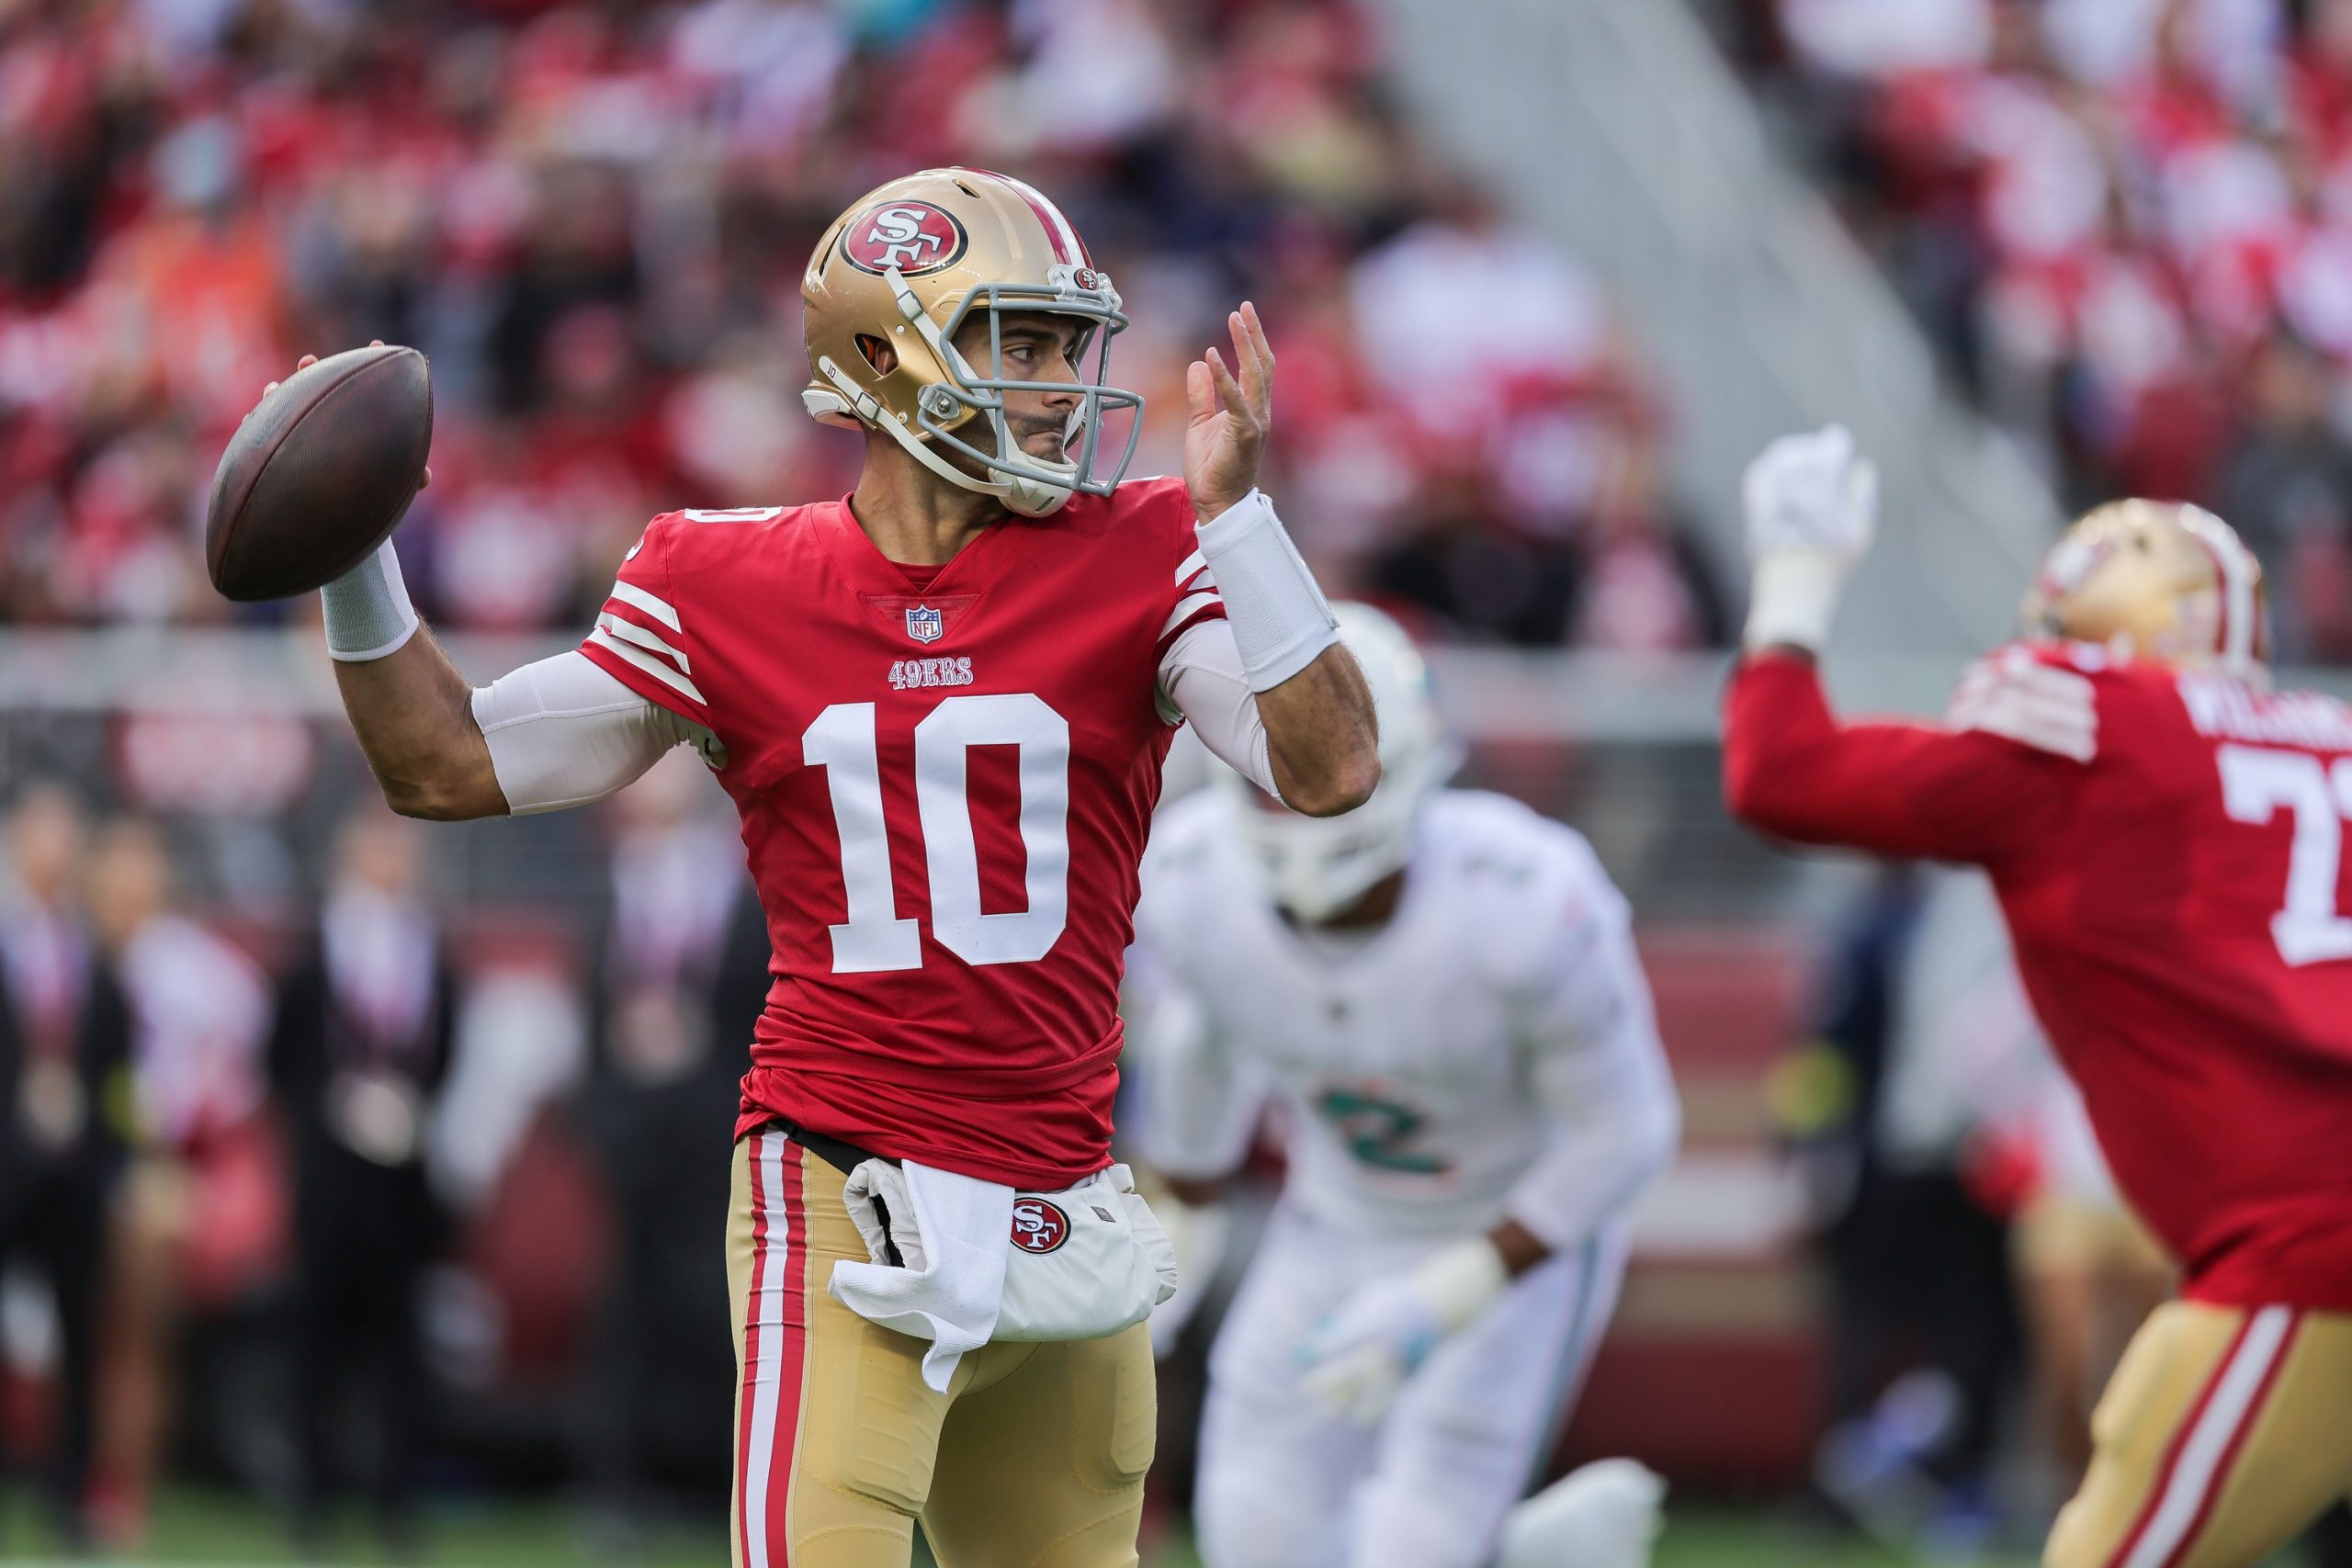 Miami Dolphins vs. San Francisco 49ers predictions for NFL Week 13